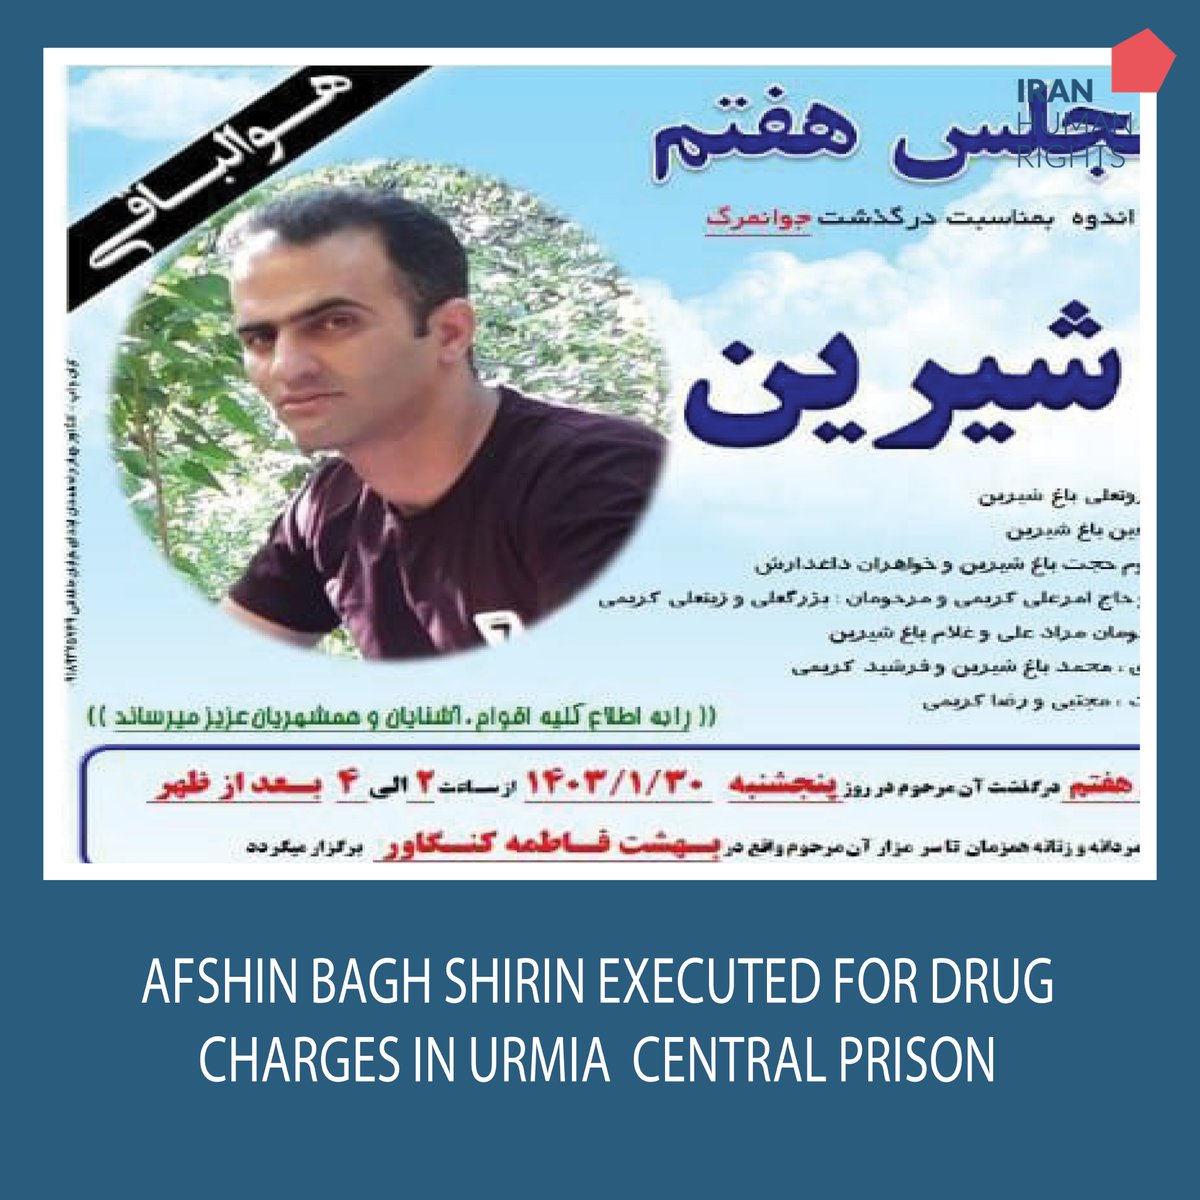 #Iran: Afshin Bagh Shirin, a 37-year-old man sentenced to death for drug-related charges by the Revolutionary Court, was executed in Urmia Central Prison on 13th April. He was on death row for 6 years.

#StopDrugExecutions
#StopExecutionsInIran
iranhr.net/en/articles/66…